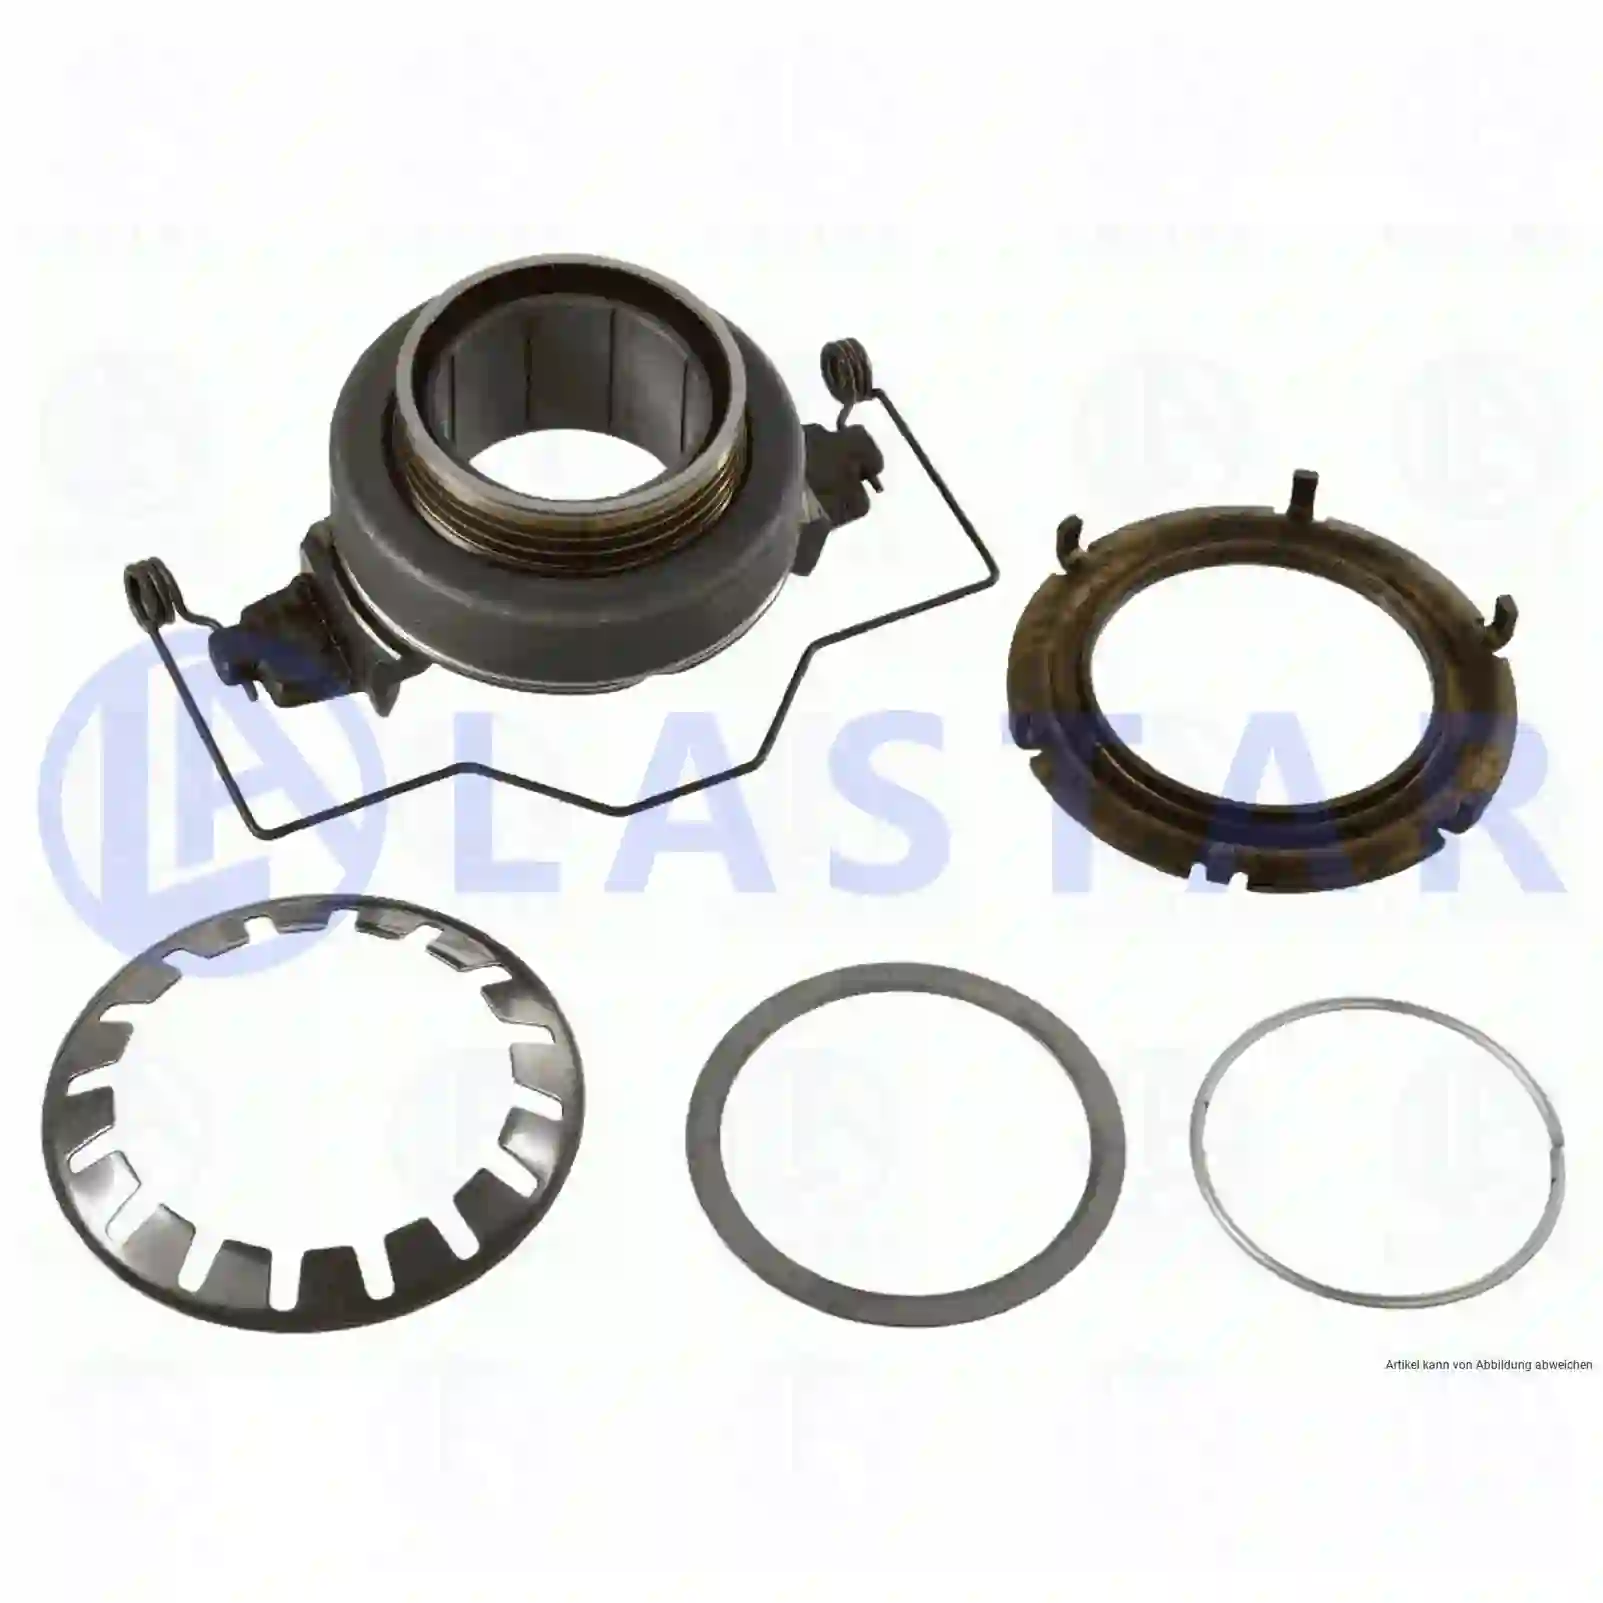 Release bearing, 77722253, 0020730007, 7420730007, 20569151, 20730007, 3192218 ||  77722253 Lastar Spare Part | Truck Spare Parts, Auotomotive Spare Parts Release bearing, 77722253, 0020730007, 7420730007, 20569151, 20730007, 3192218 ||  77722253 Lastar Spare Part | Truck Spare Parts, Auotomotive Spare Parts